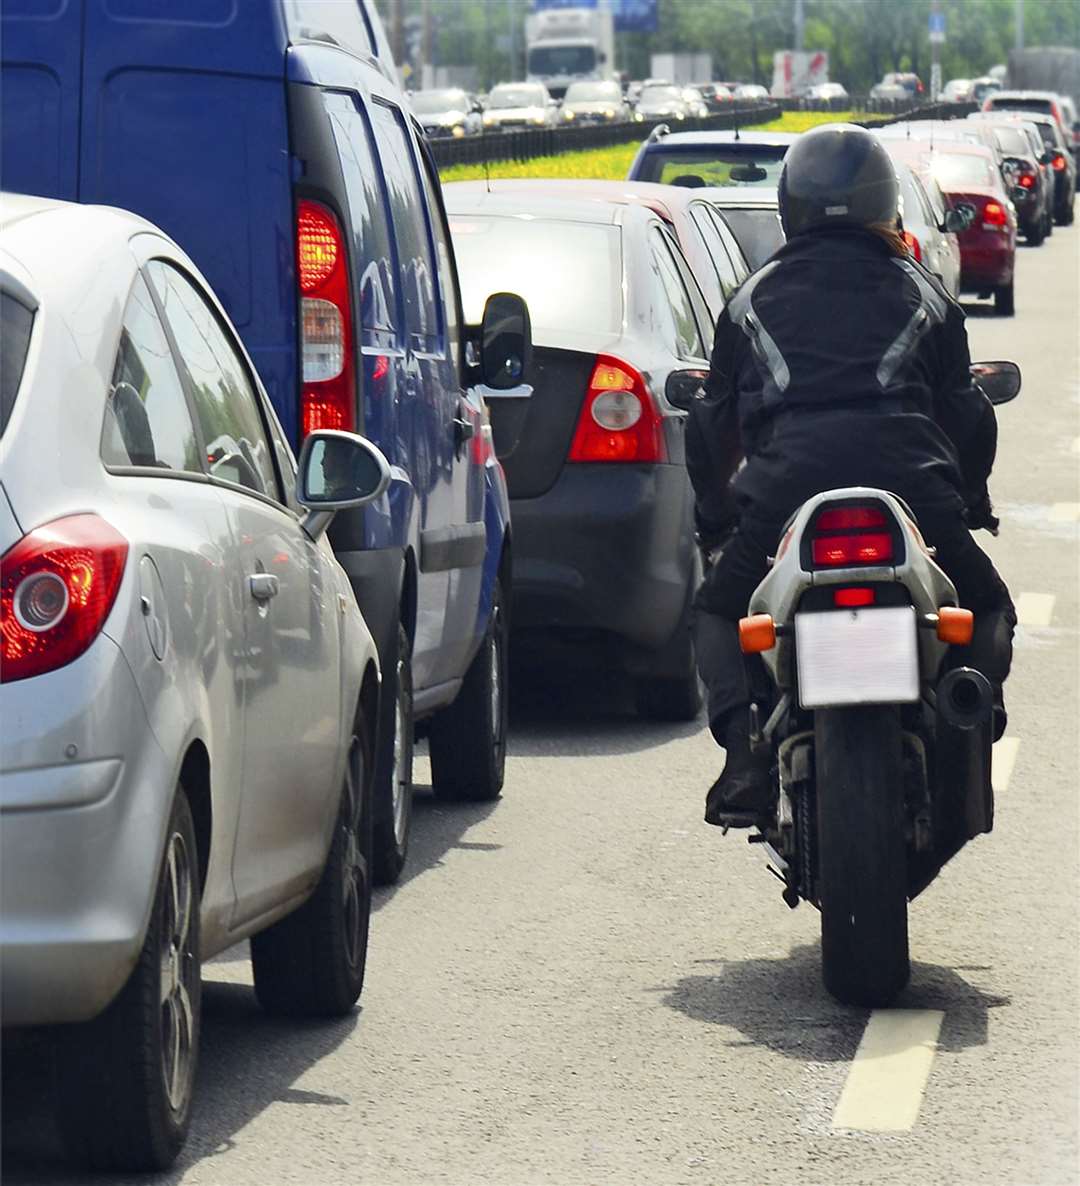 Bikers can give their opinions on local road safety initiatives.